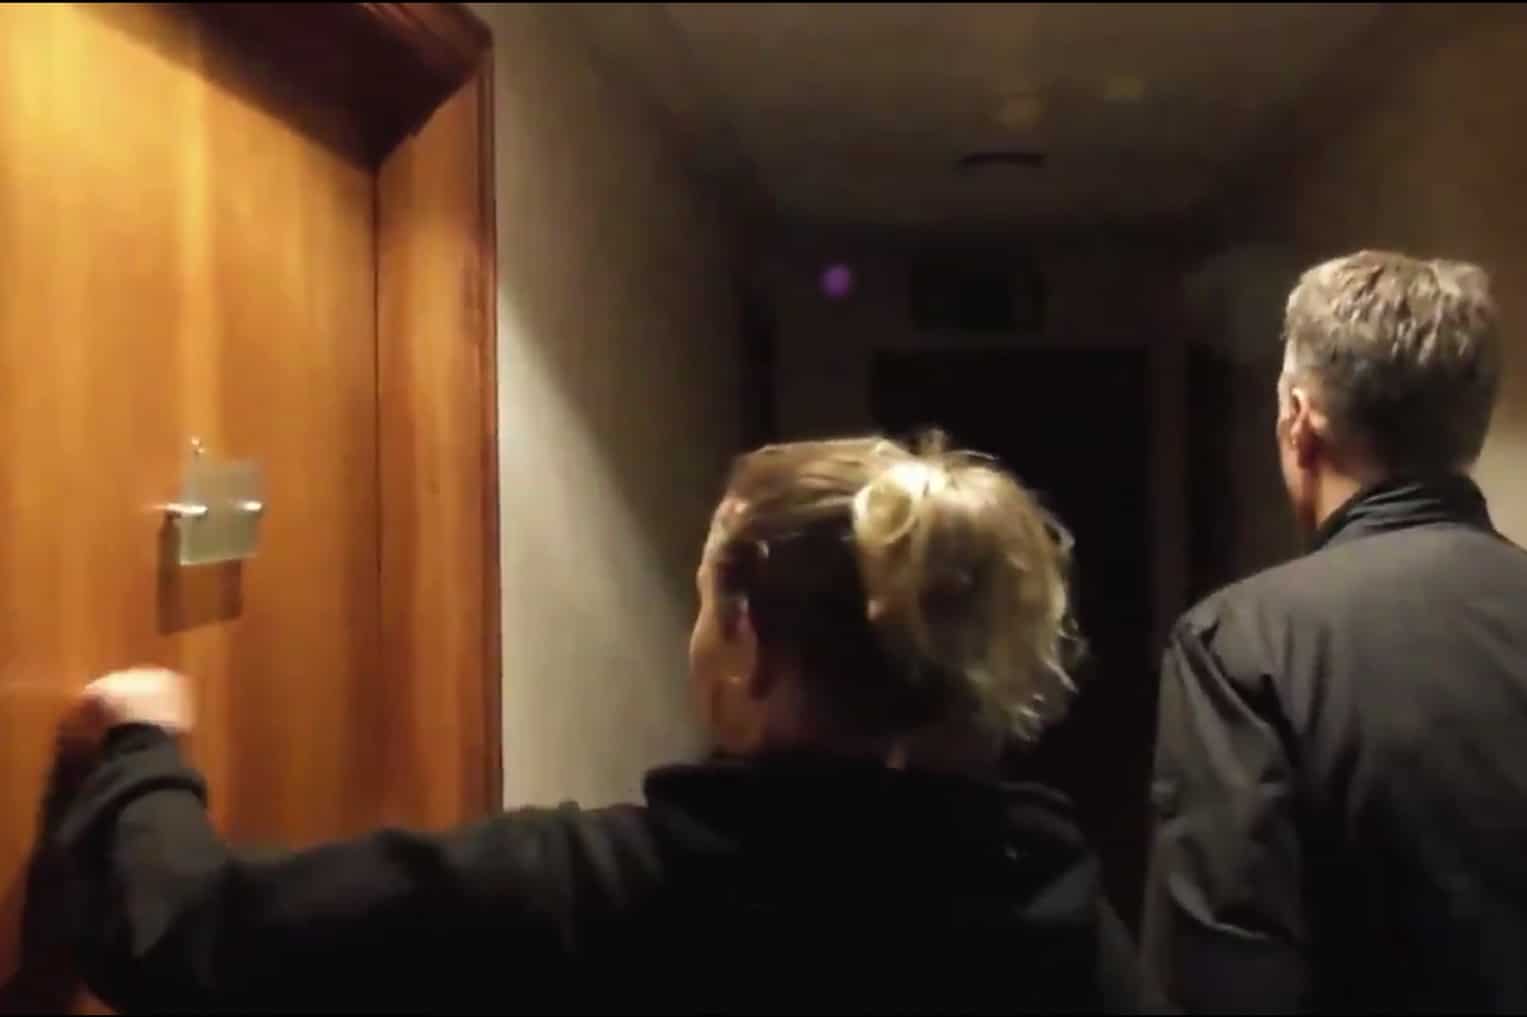 “Appalling” clip of Britain First ‘migrant hunting’ in hotels causes outrage on social media